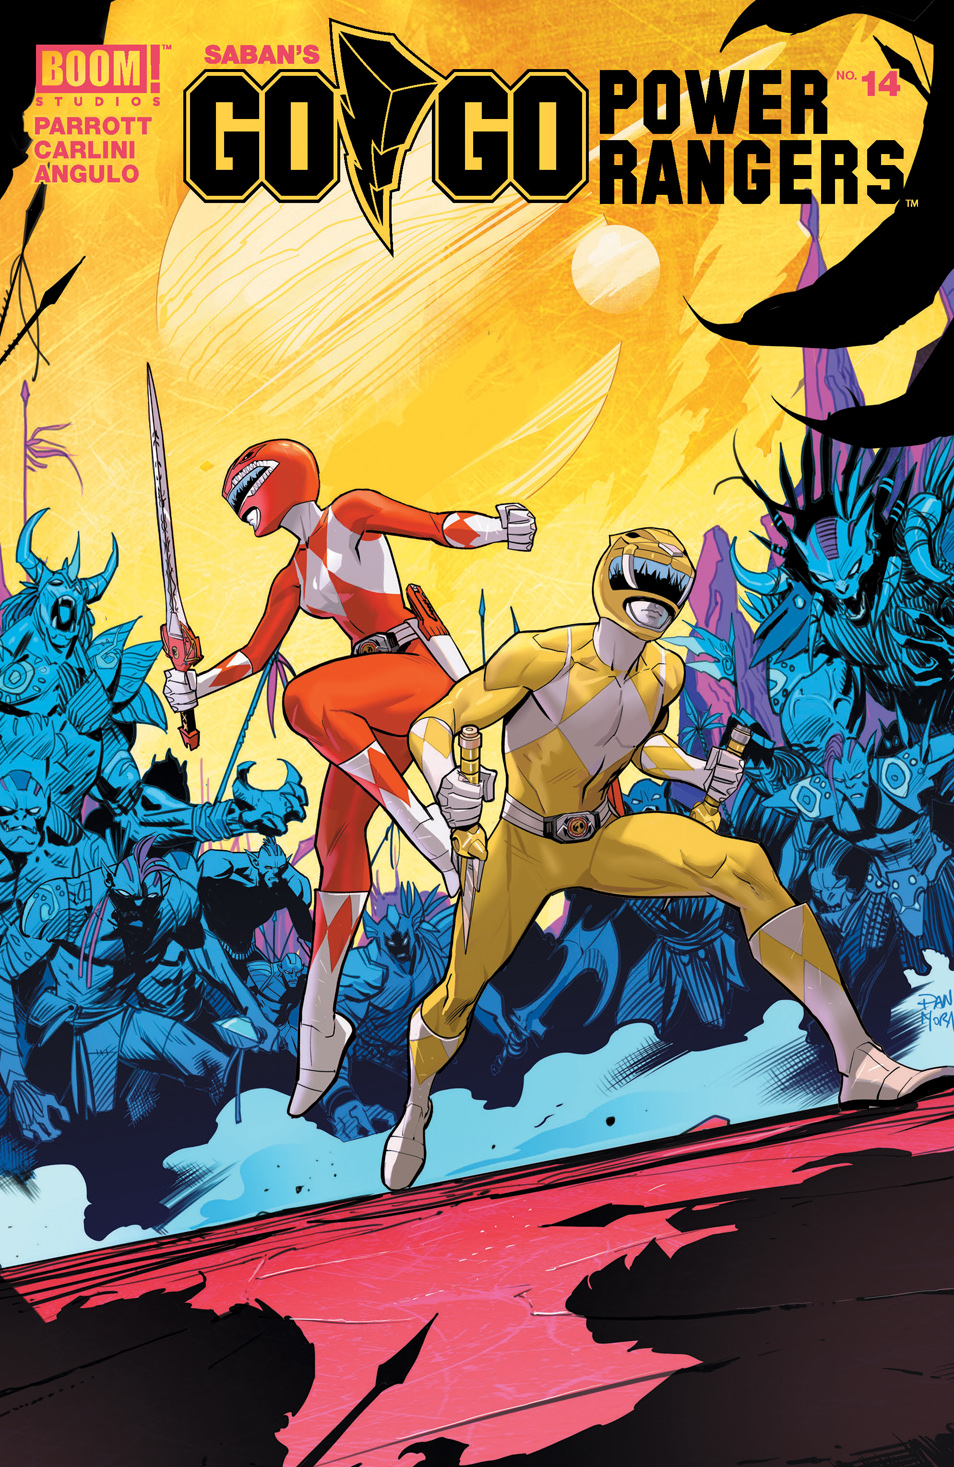 This image is the cover for the book Saban's Go Go Power Rangers #14, Saban's Go Go Power Rangers